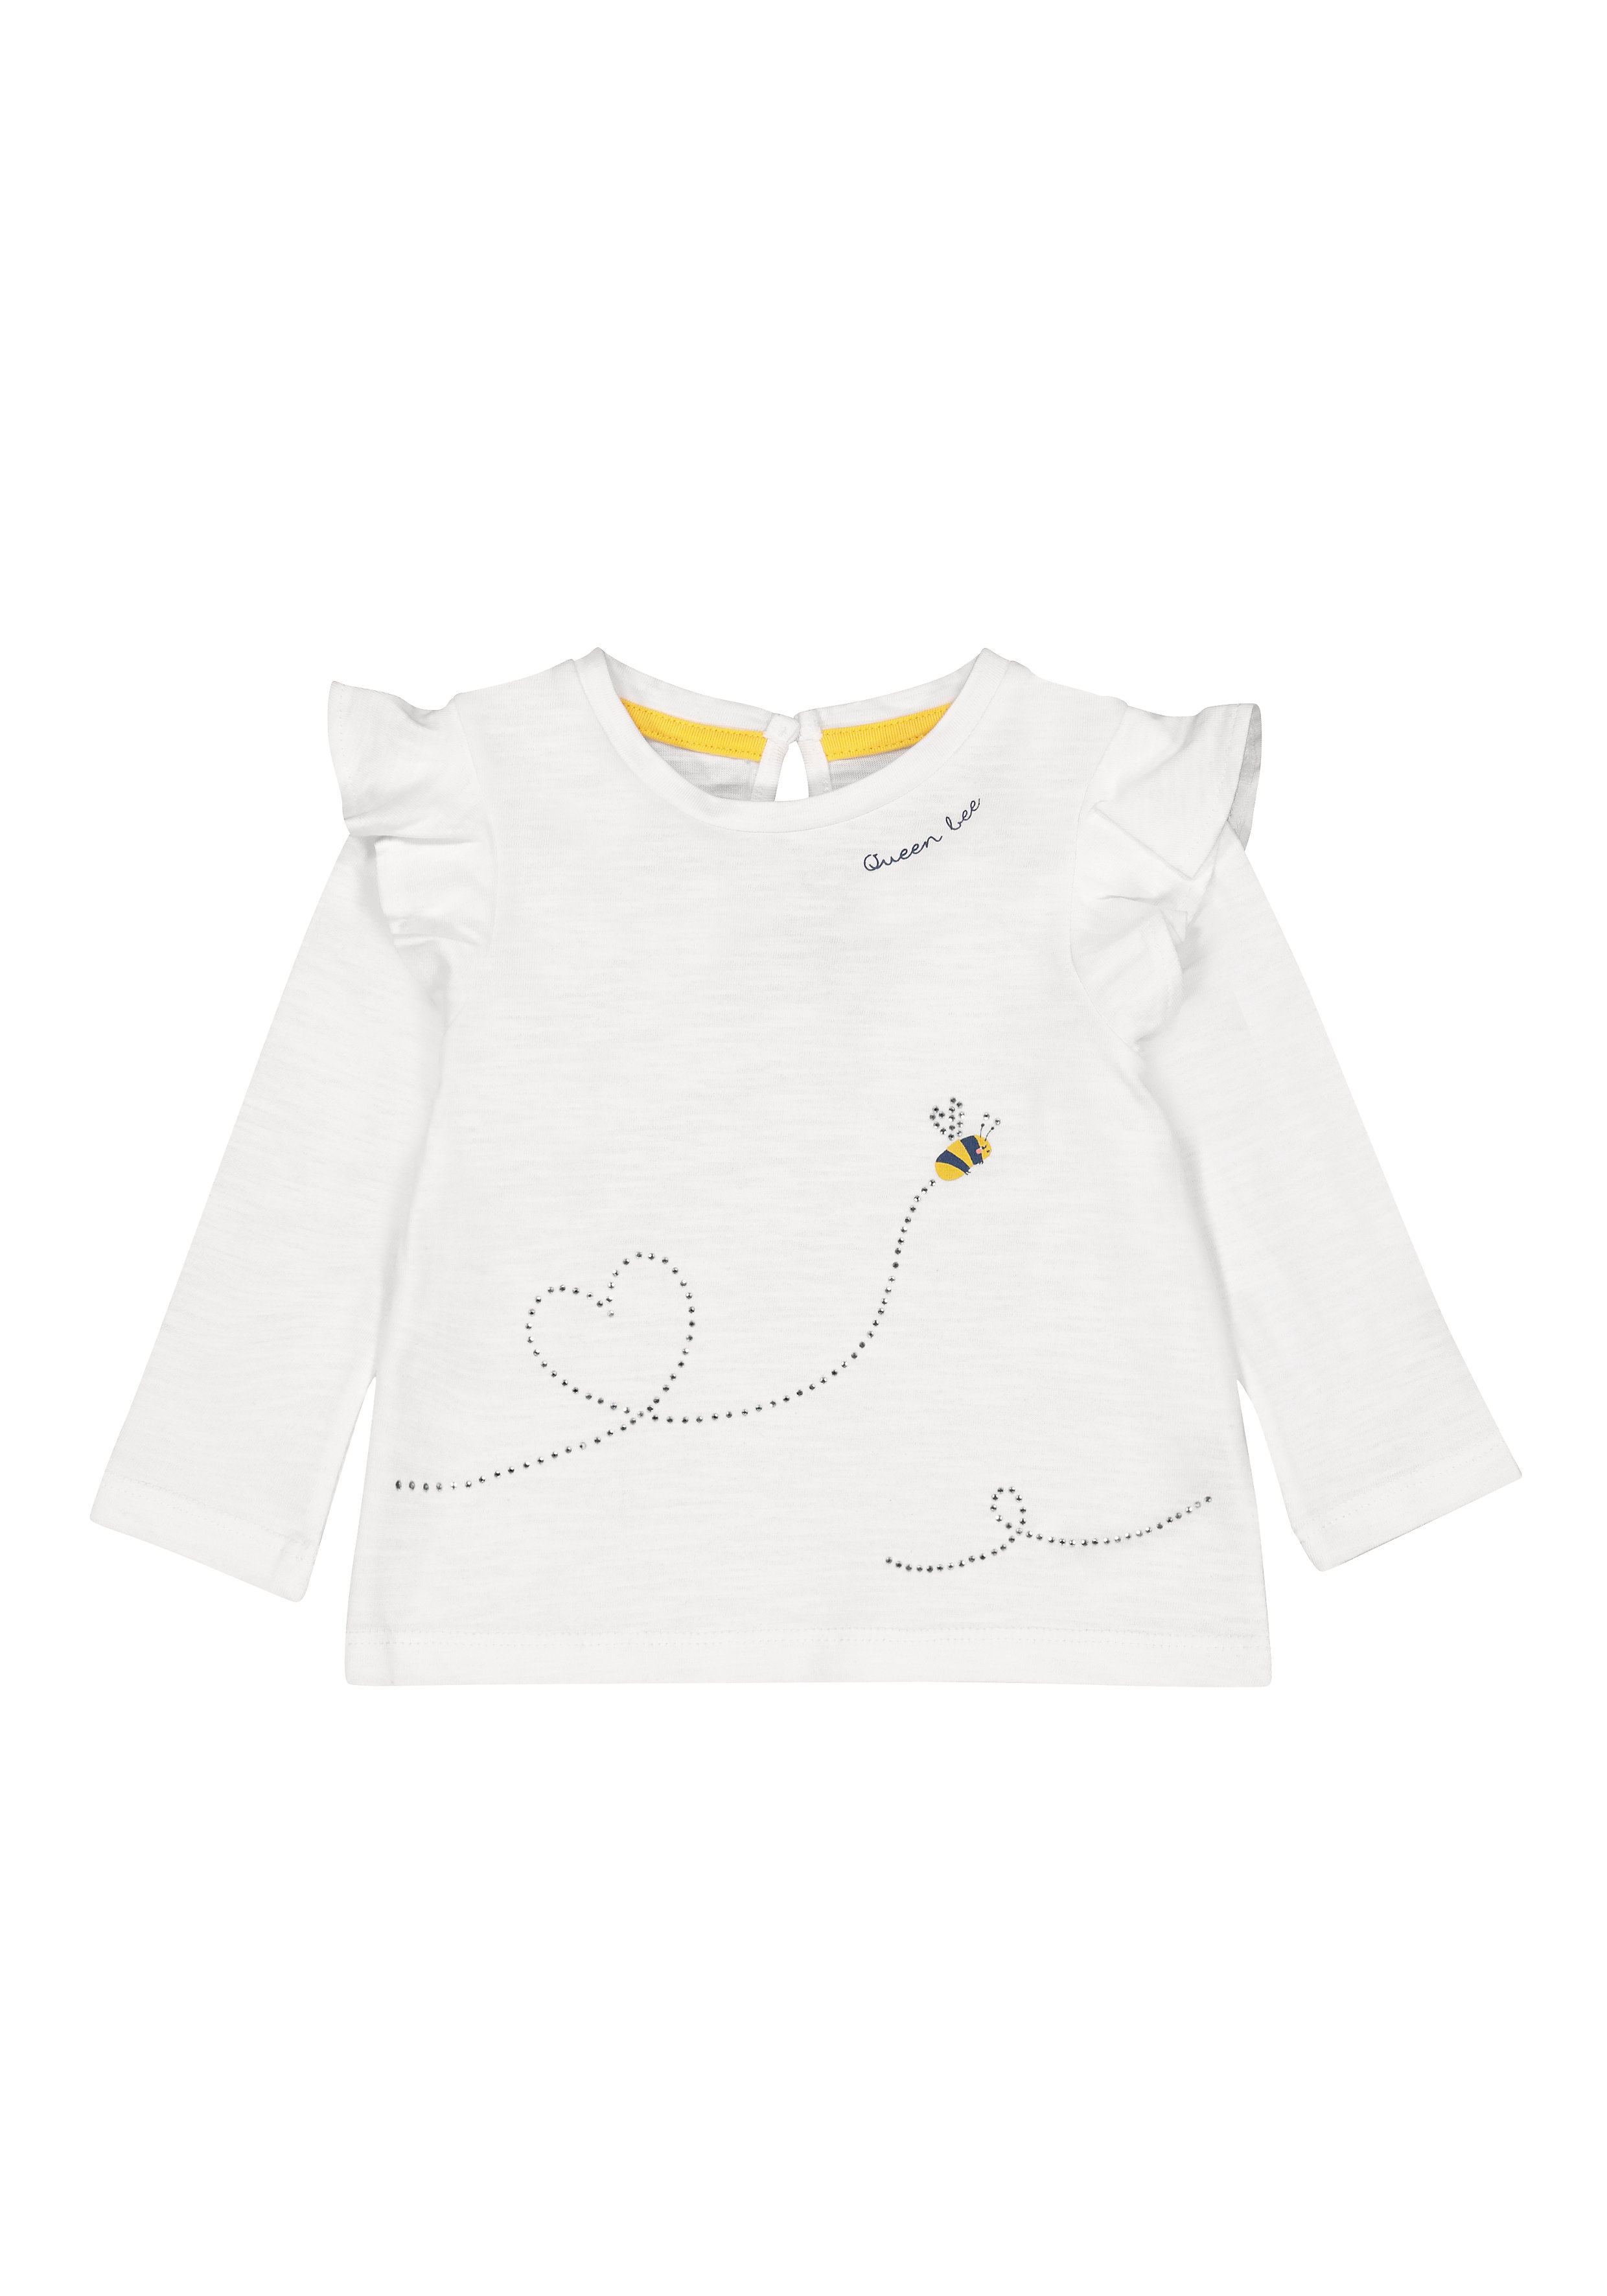 Mothercare | Girls Full Sleeves T-Shirt Sparkly Bee Print - White 0